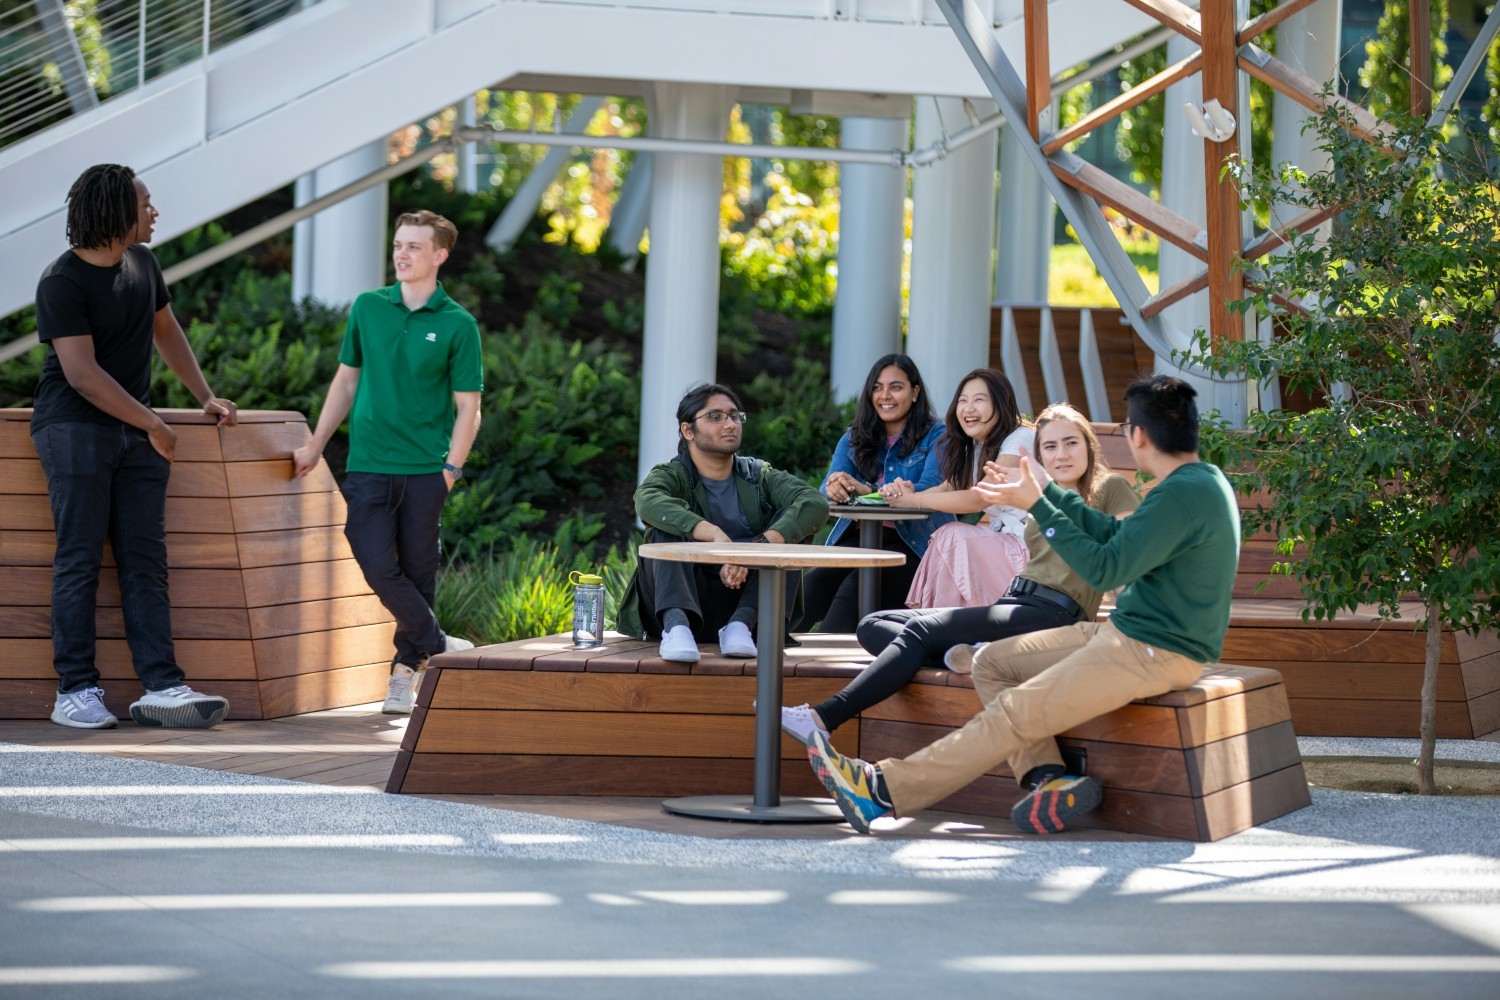 NVIDIA’s Bay Area campus features outdoor shared spaces where employees can connect and collaborate.